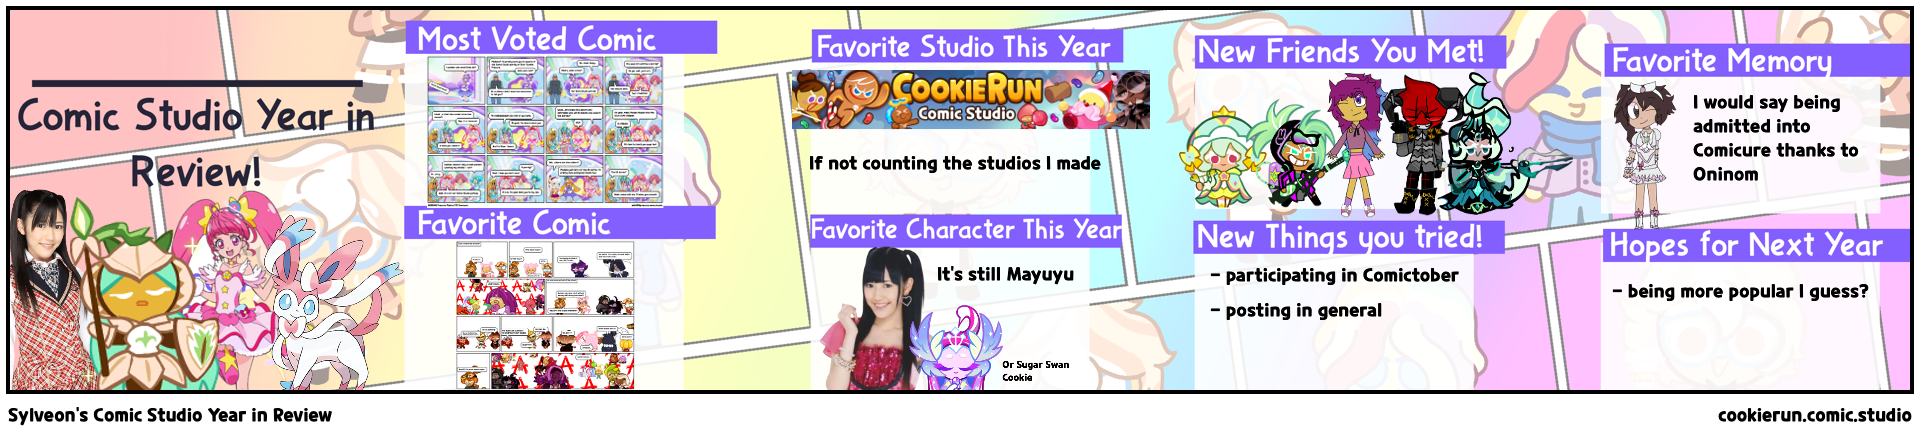 Sylveon's Comic Studio Year in Review